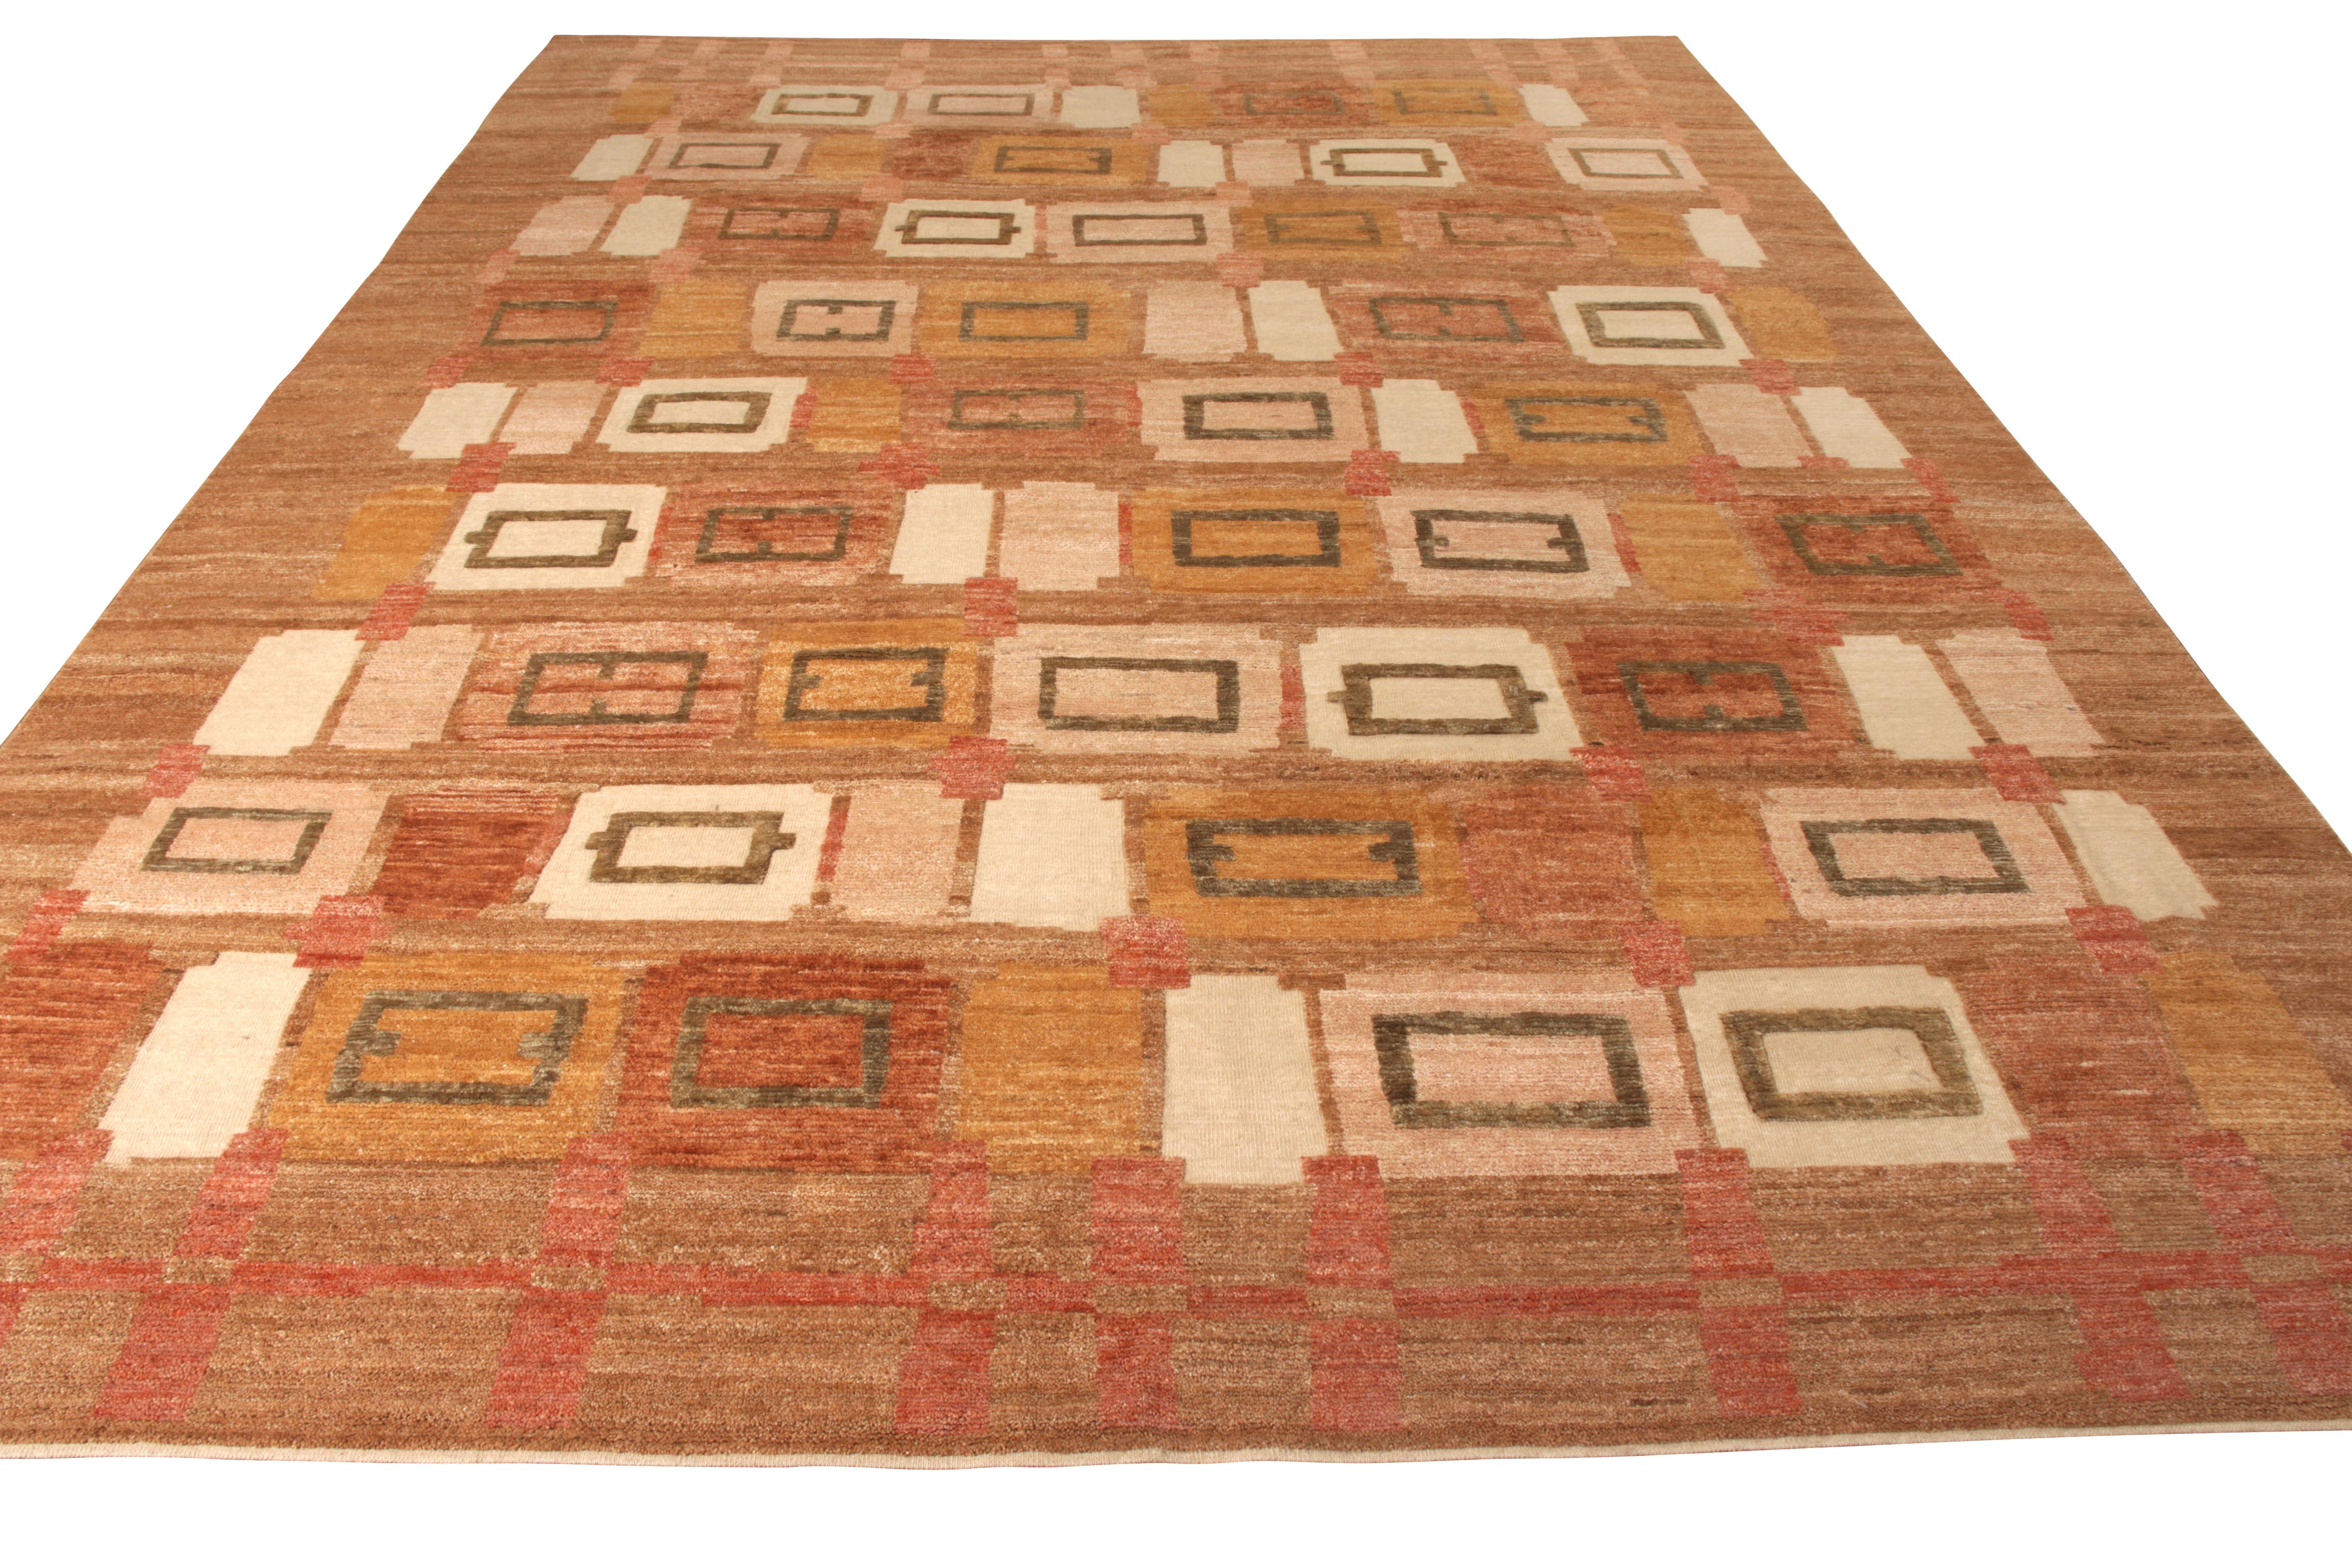 A 10 x 14 rug joining the Scandinavian Collection by Rug & Kilim, pturing acclaimed mid-century styles in new, dynamic form. Hand knotted in wool, exploring high-low texture married with the geometric pattern in warm beige-brown and pink tones.